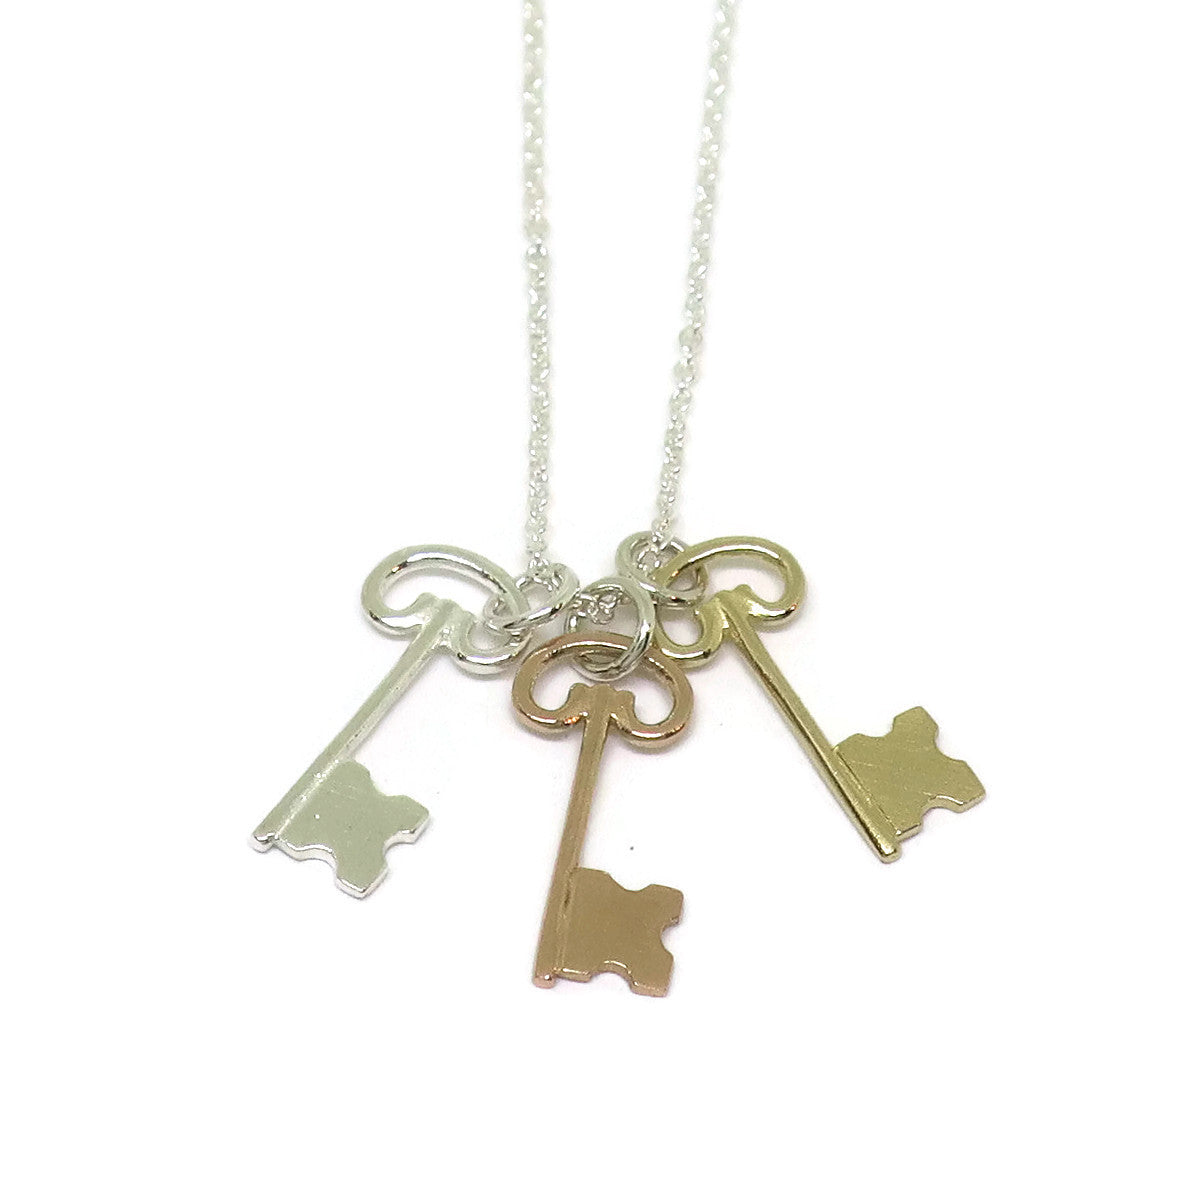 Key Necklace- A symbol of trust and respect